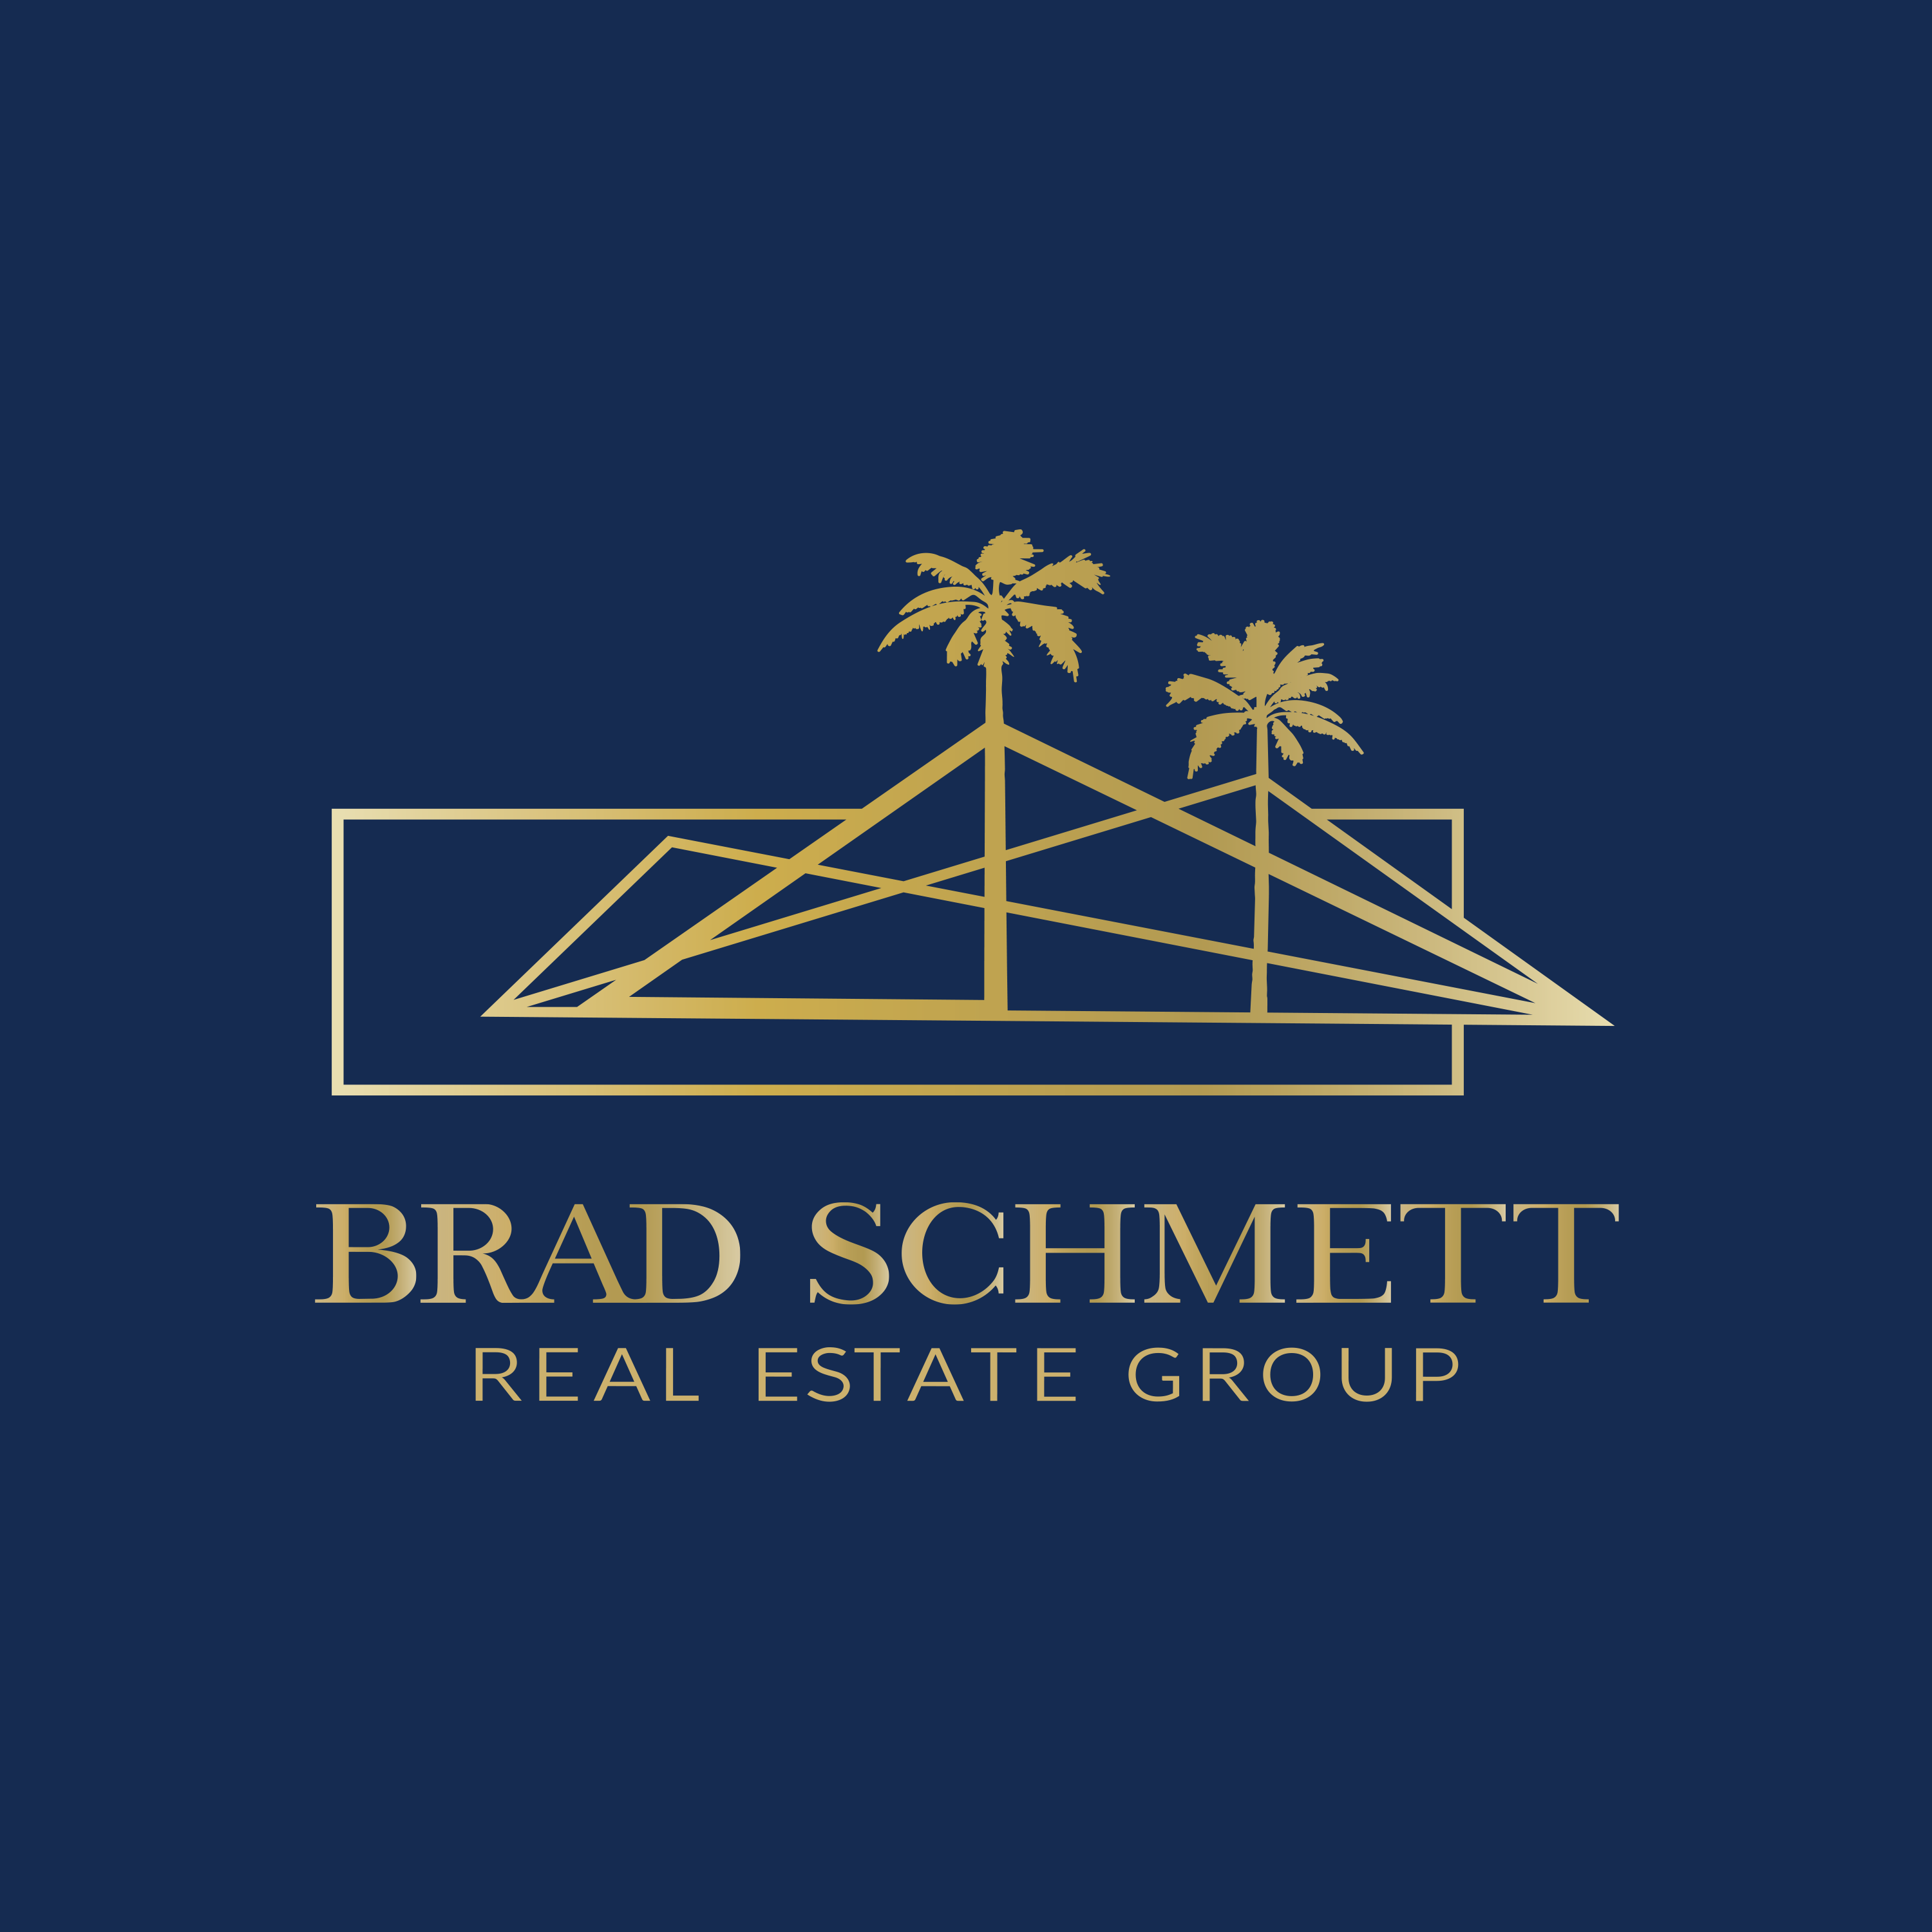 Palm Springs, California, United States agency FrogFrenchie Design helped Brad Schmett Real Estate Group grow their business with SEO and digital marketing